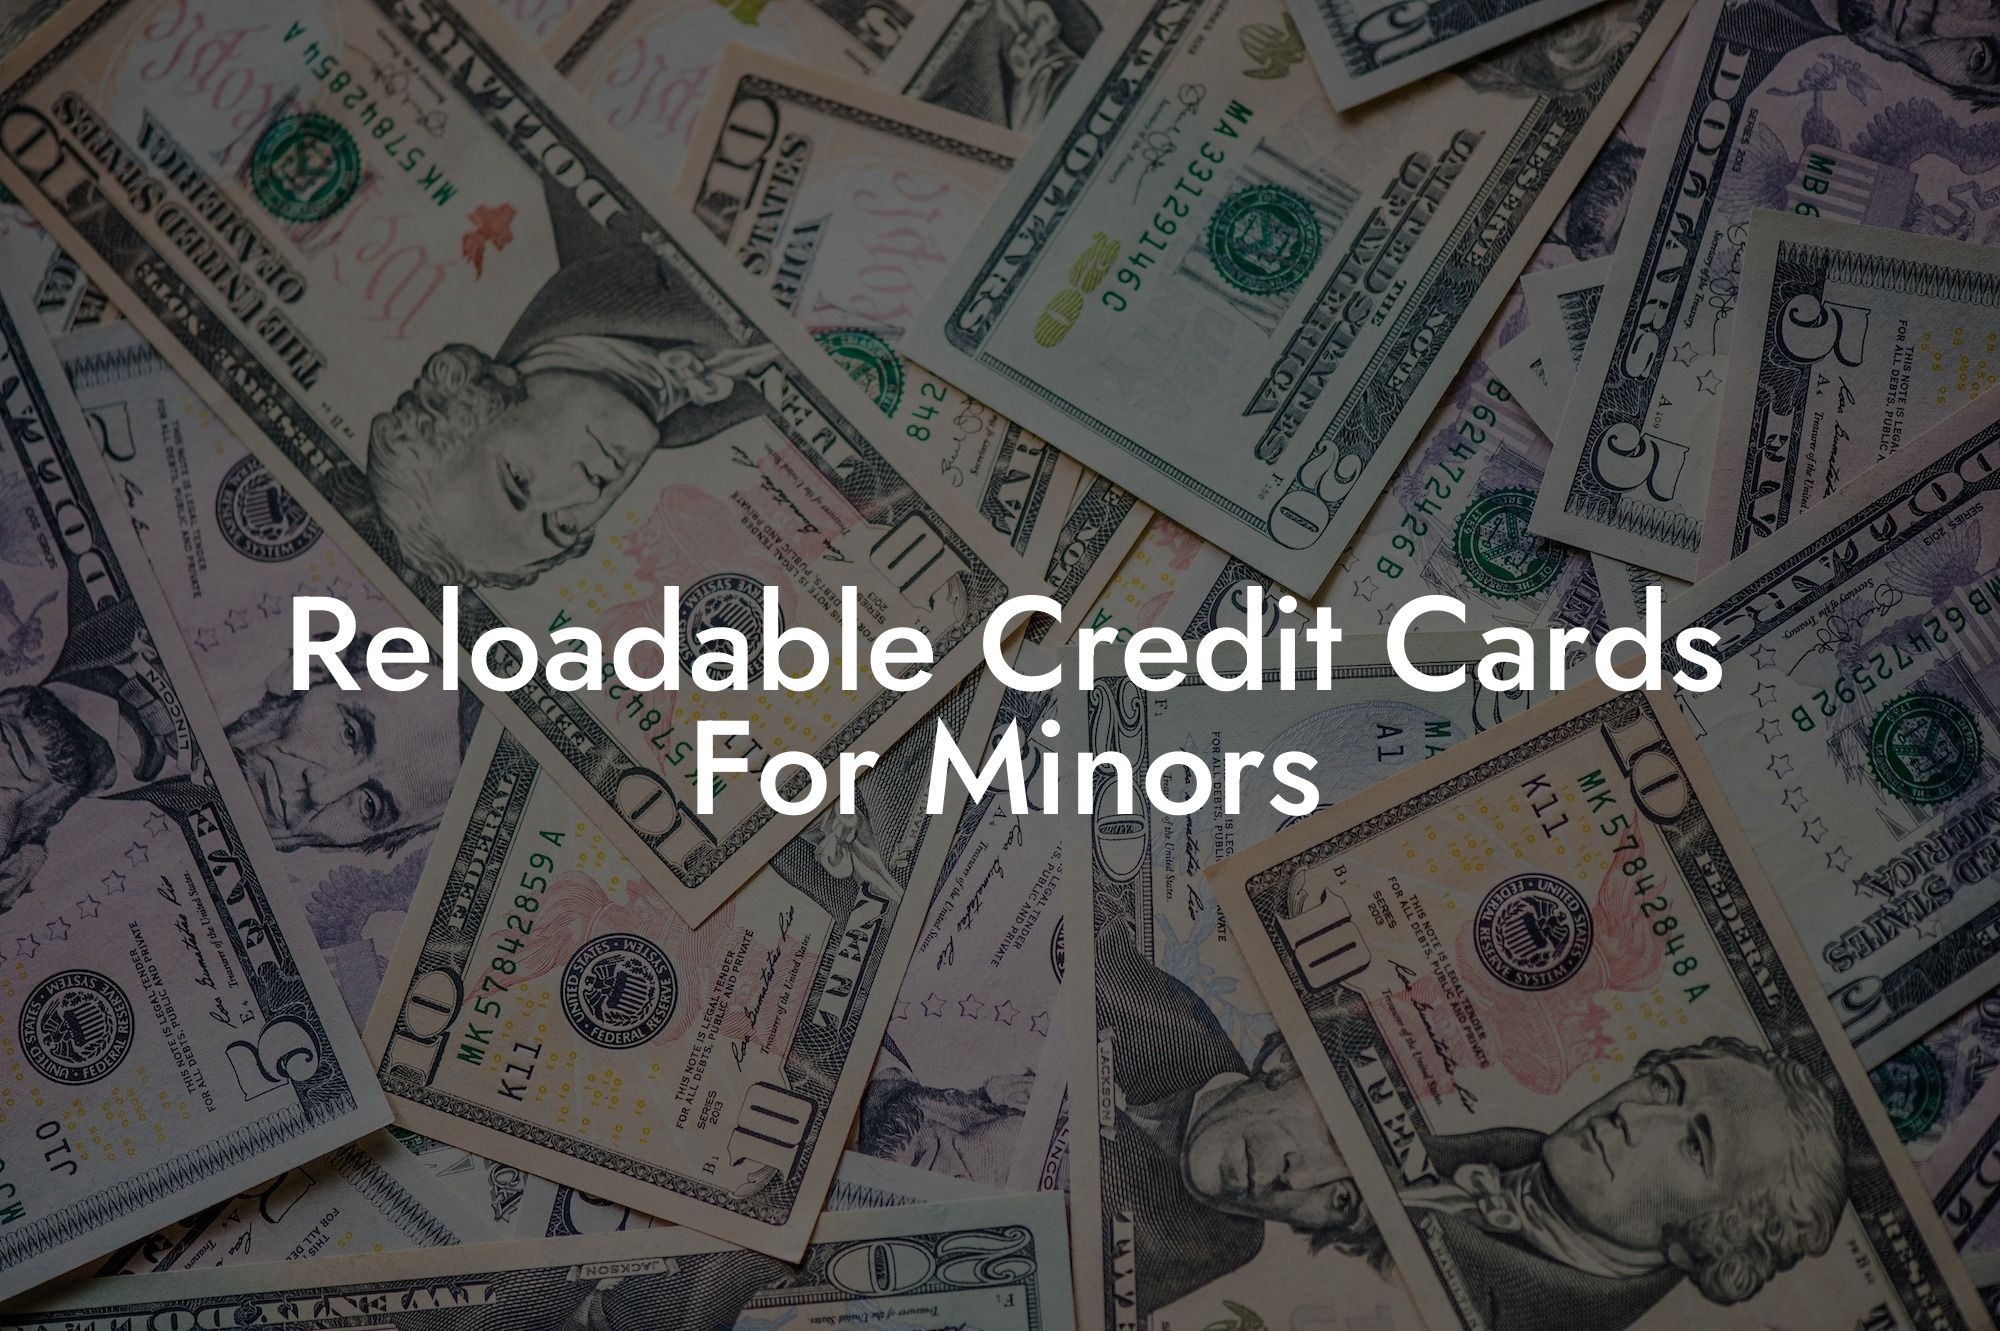 Reloadable Credit Cards For Minors